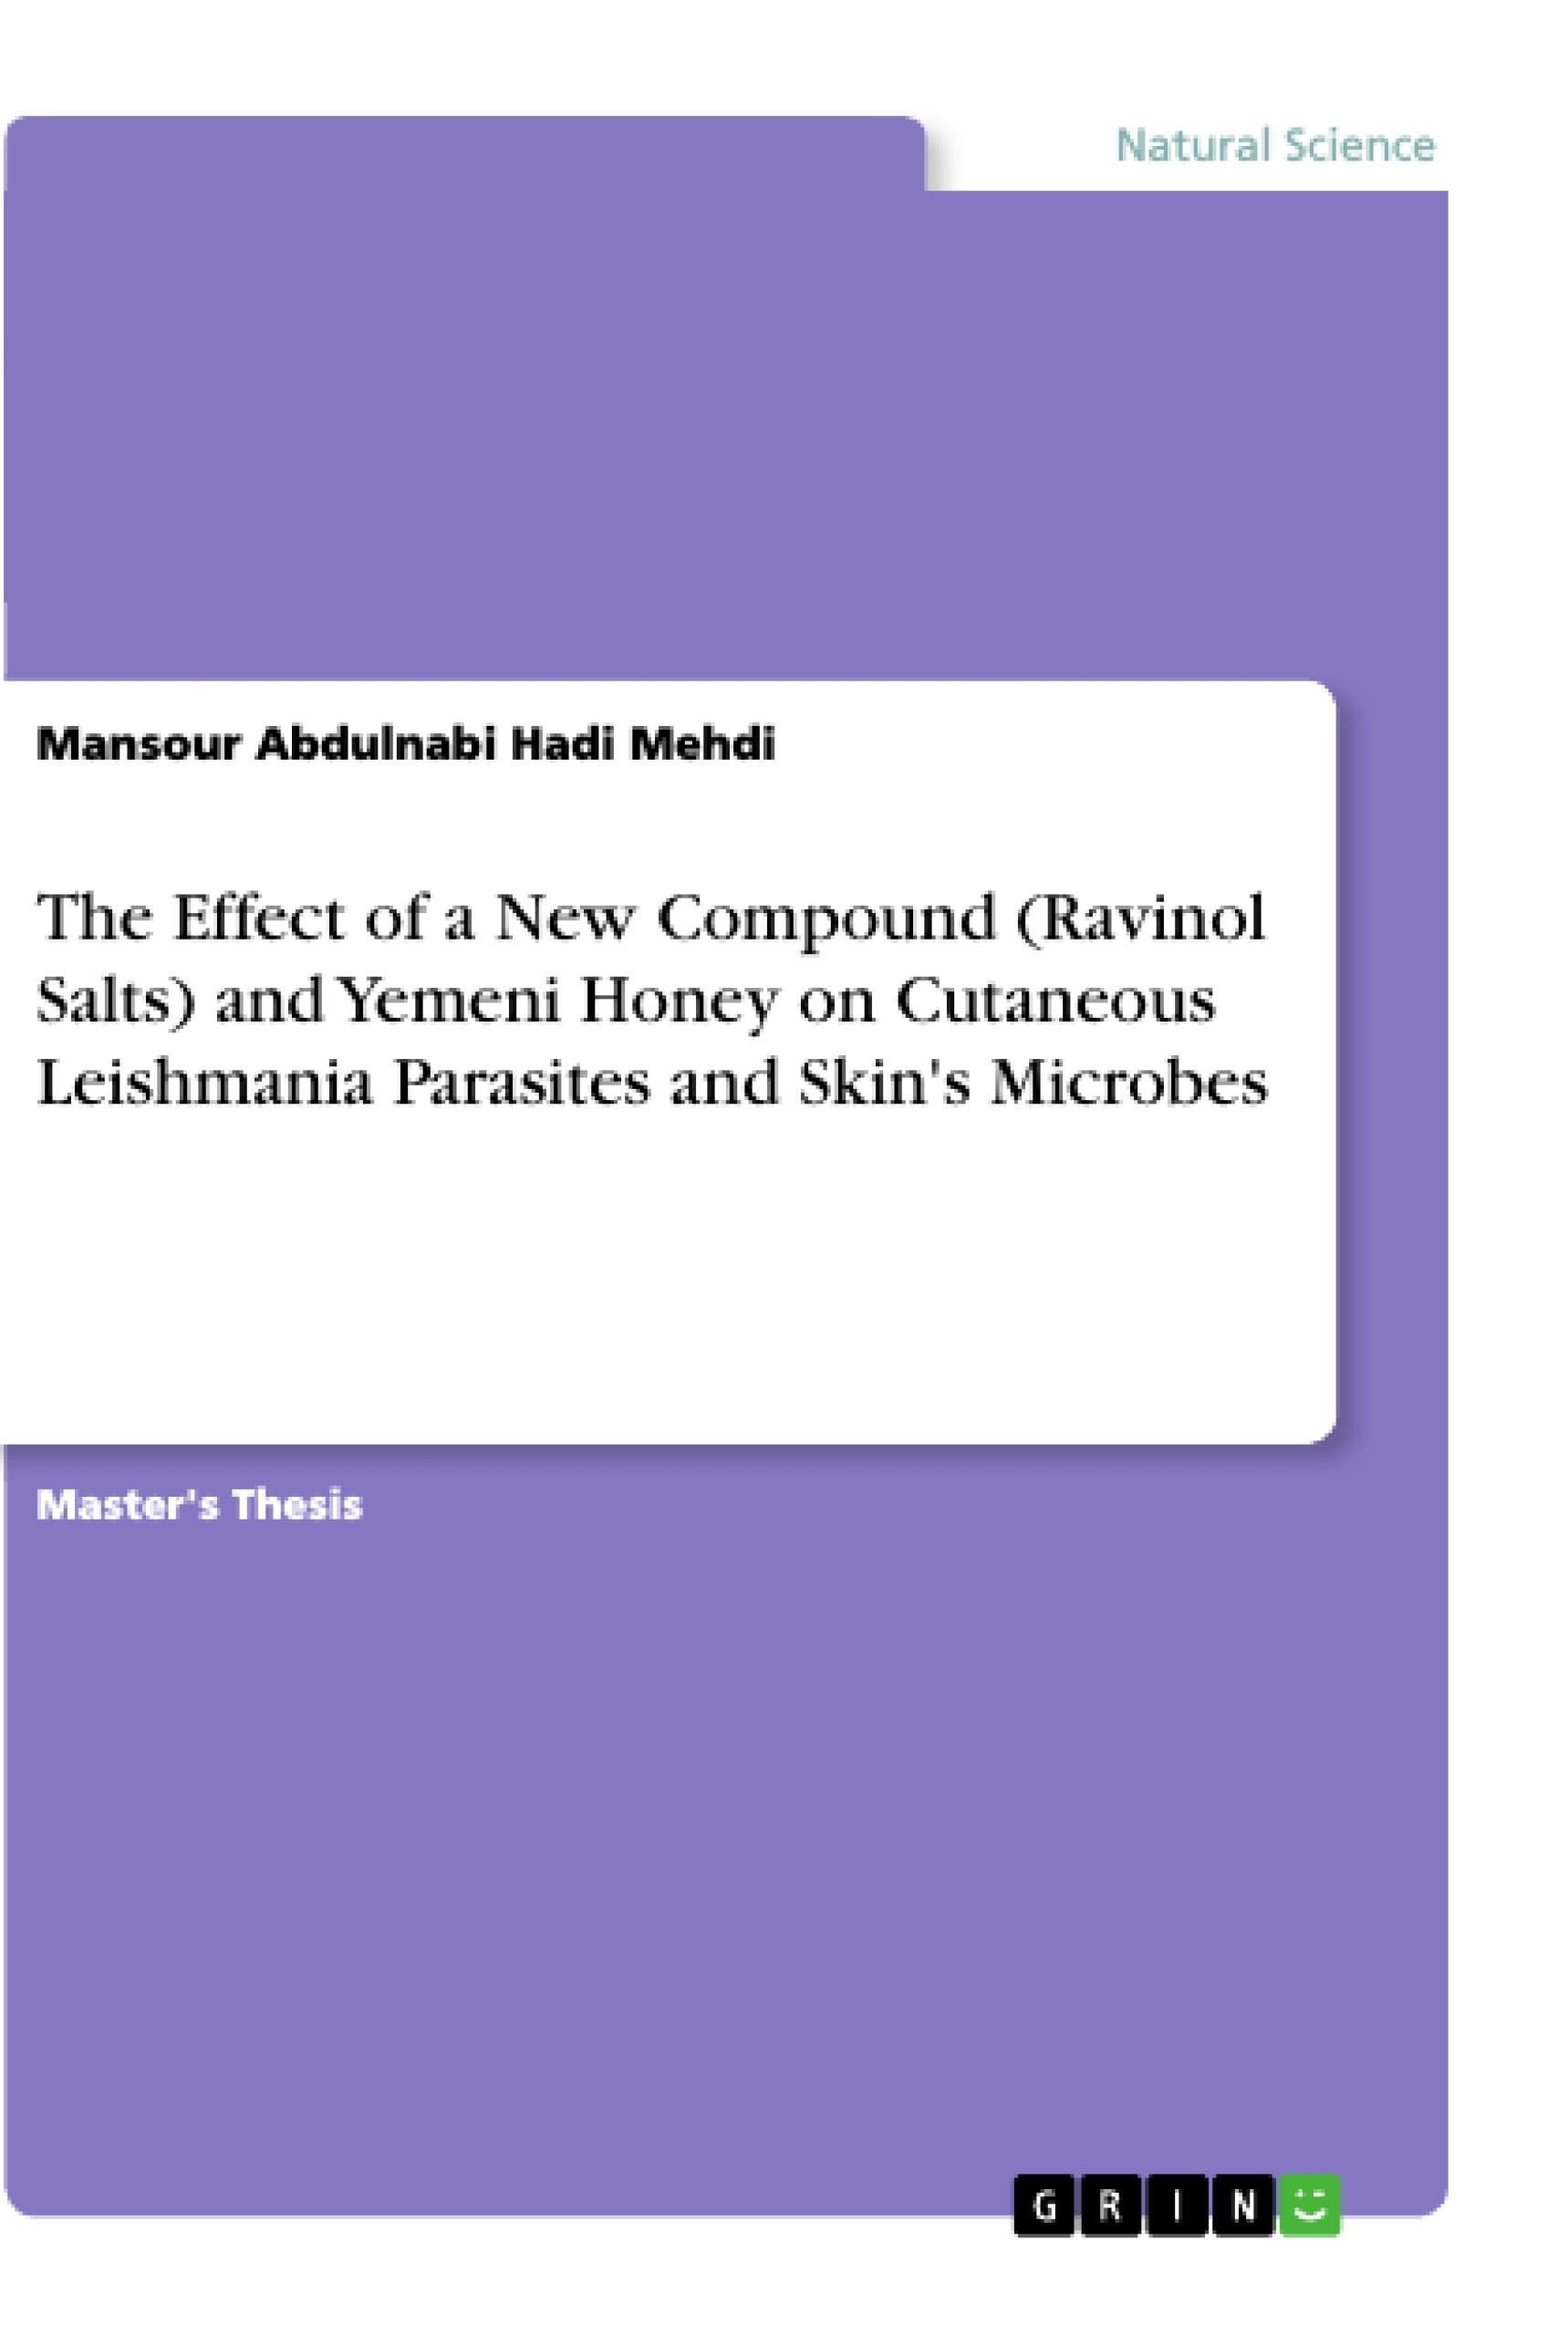 Titre: The Effect of a New Compound (Ravinol Salts) and Yemeni Honey on Cutaneous Leishmania Parasites and Skin's Microbes